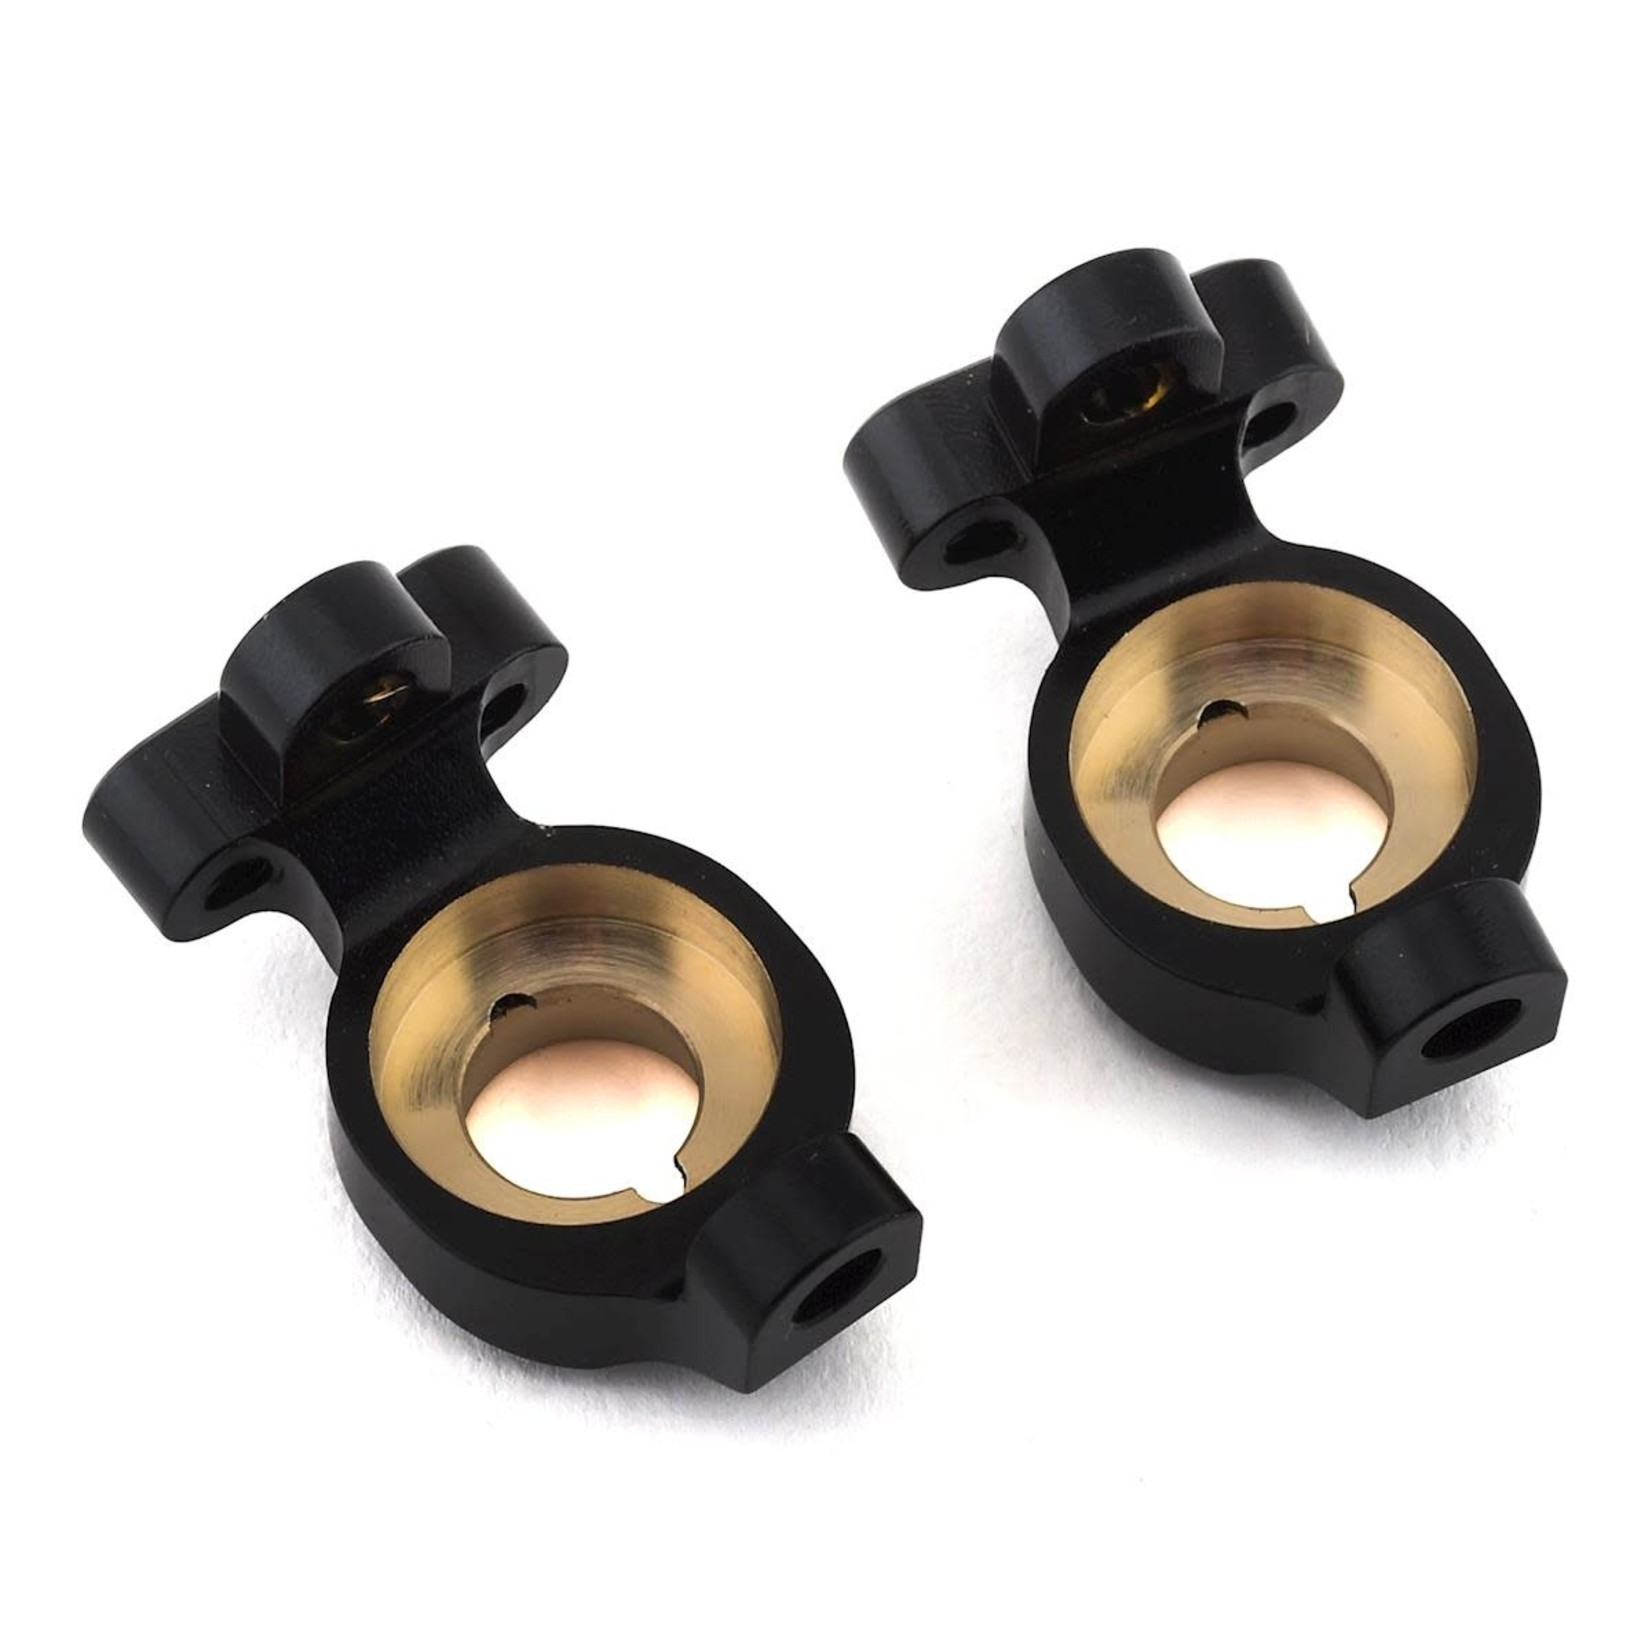 ST Racing Concepts ST Racing Concepts Enduro Brass Front Steering Knuckle (Black) #STC42062KBR